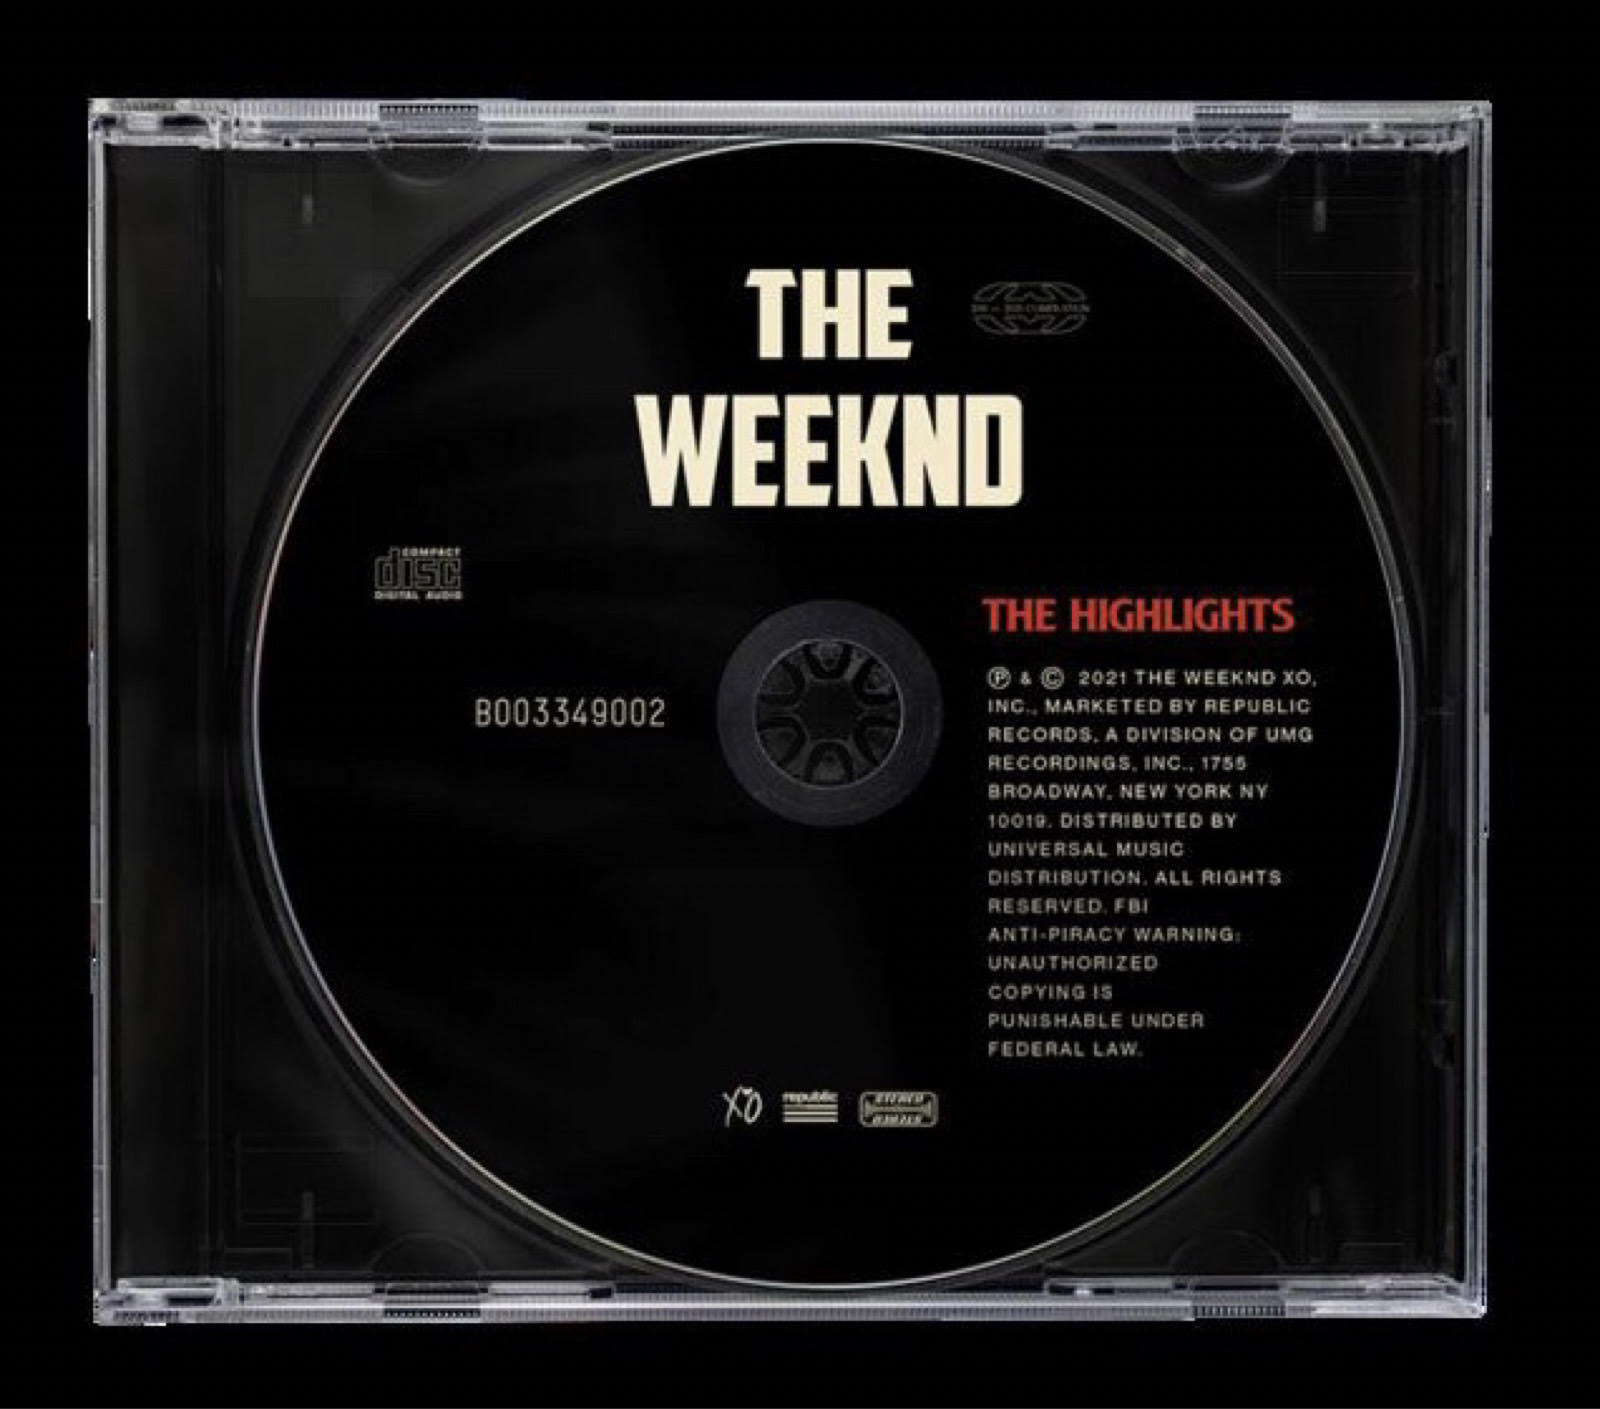 The Weeknd Releases Greatest Hits Album 'The Highlights' Ahead of Super  Bowl Performance